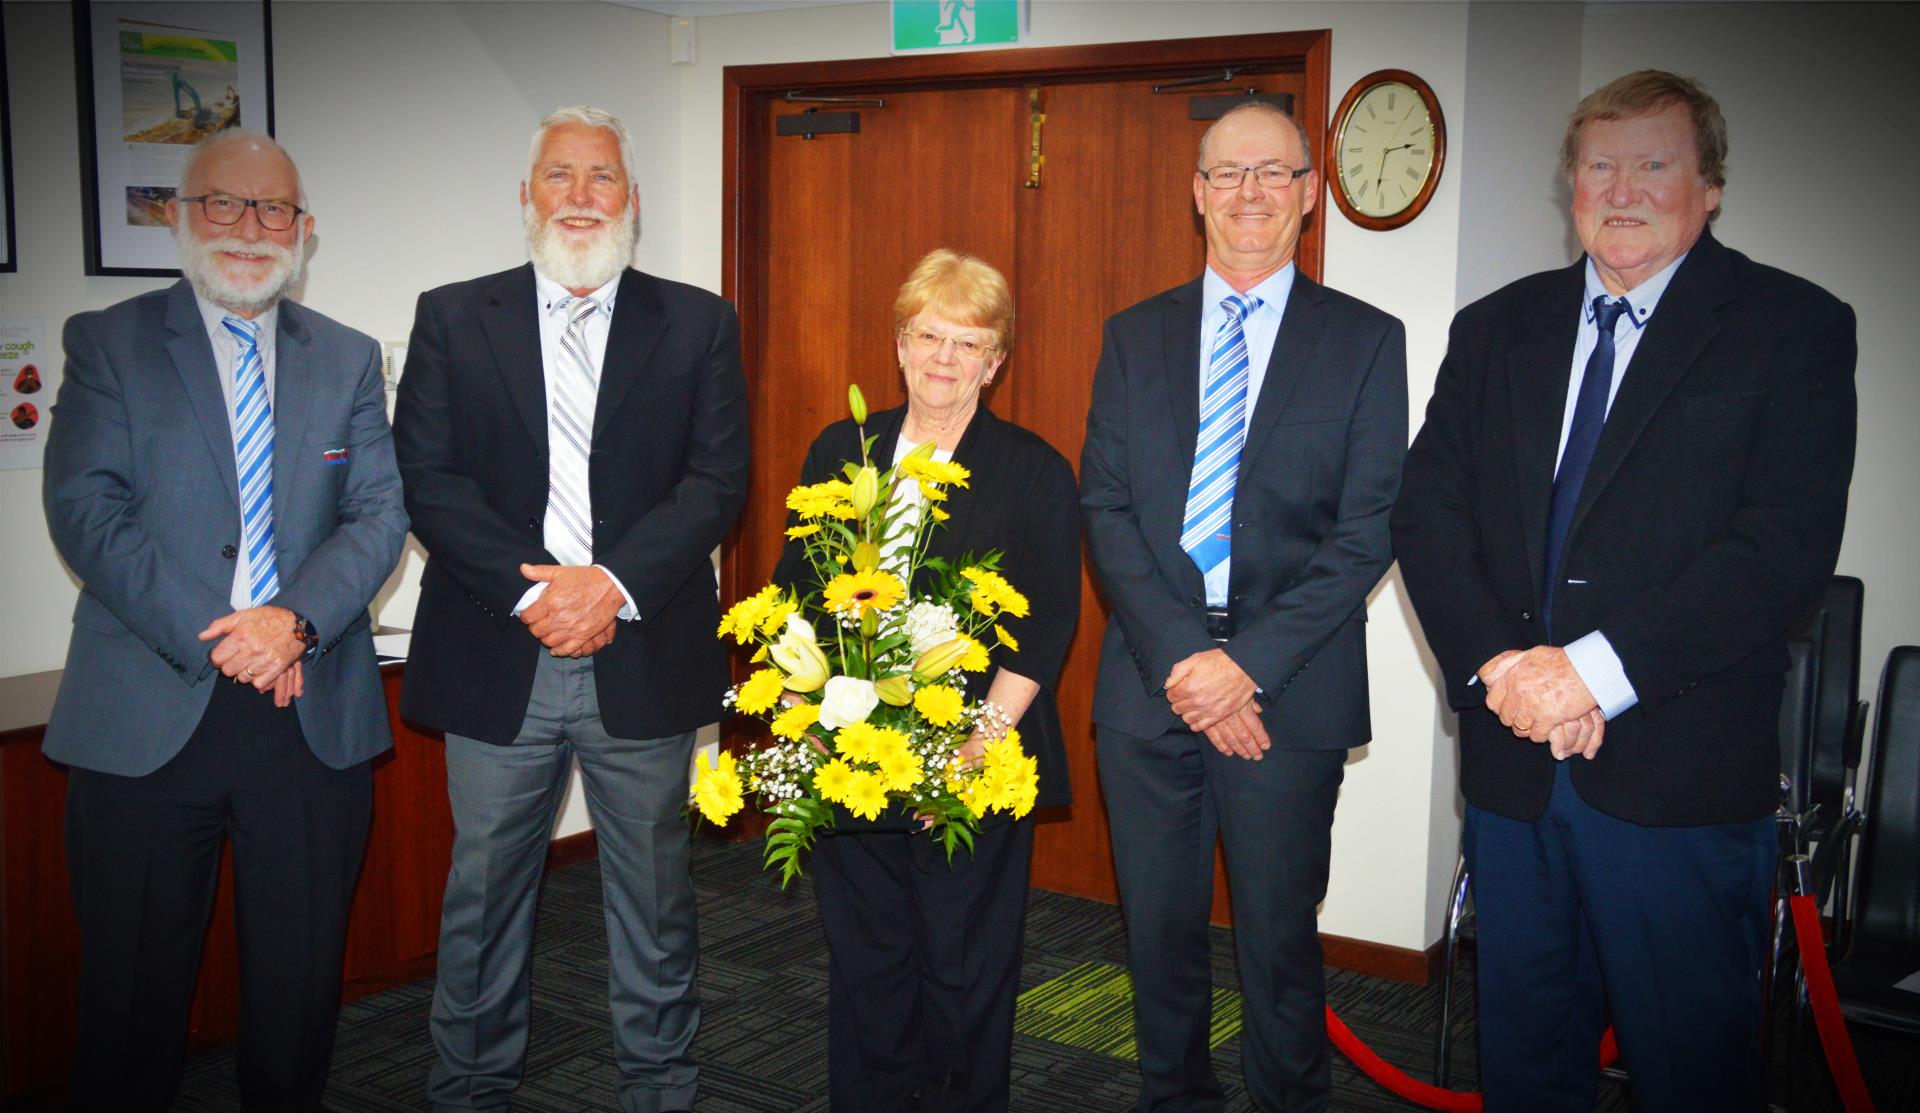 2021 Council Sworn In - Shire President & Deputy Shire President Elected